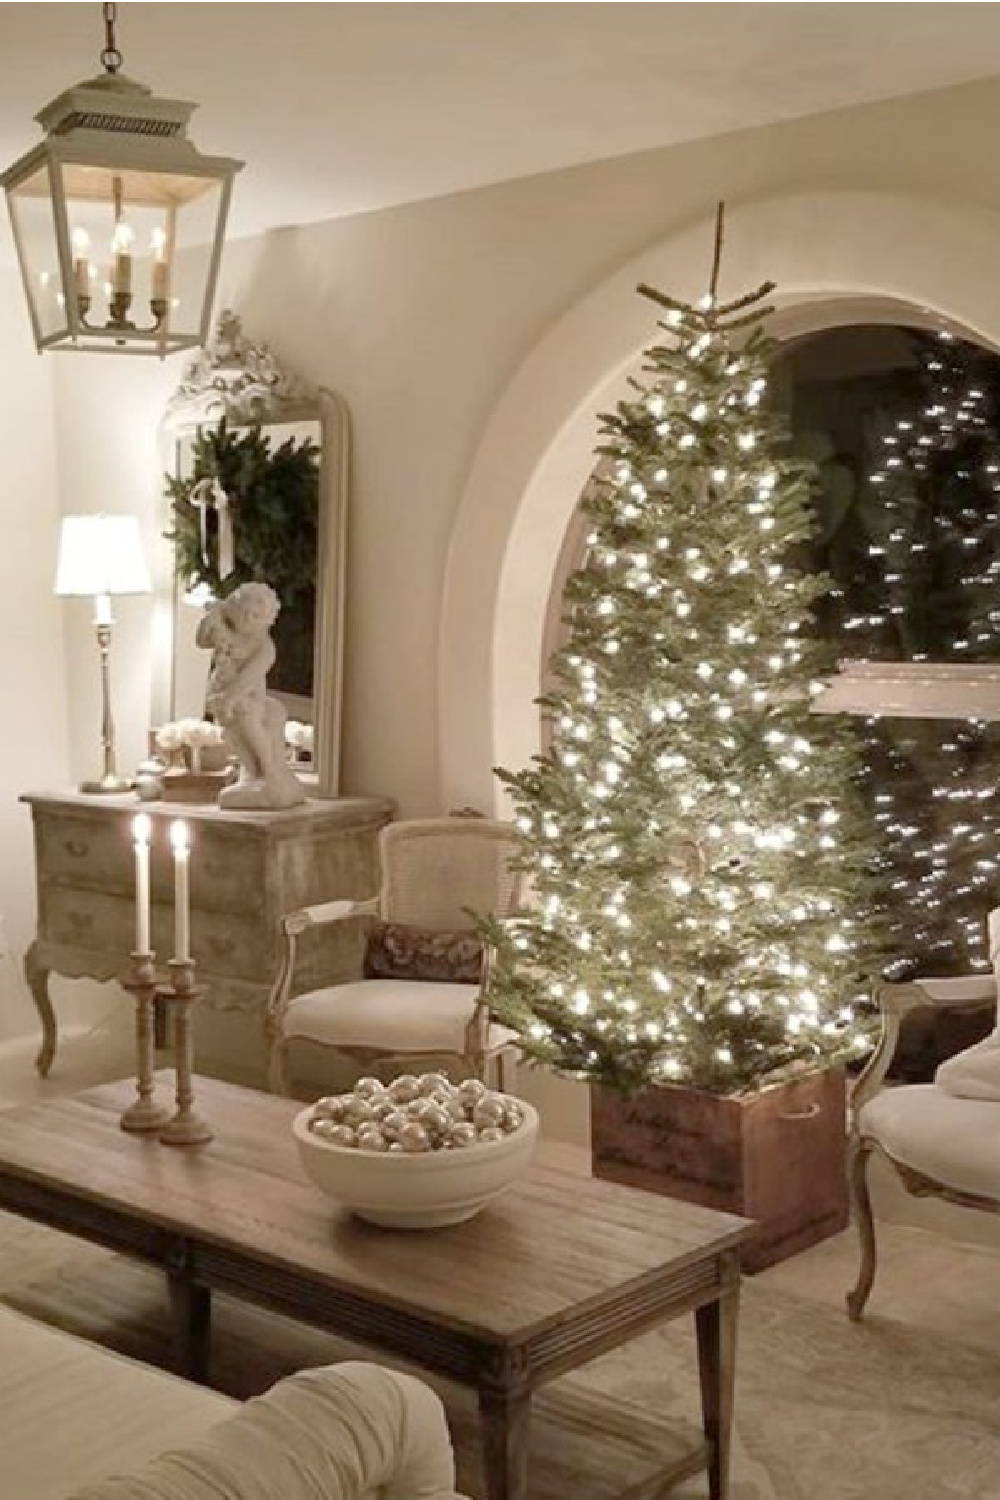 Living room with French country Christmas decor including white sophisticated details and greenery. #frenchcountry #frenchchristmas #christmasdecor #whitechristmasdecor